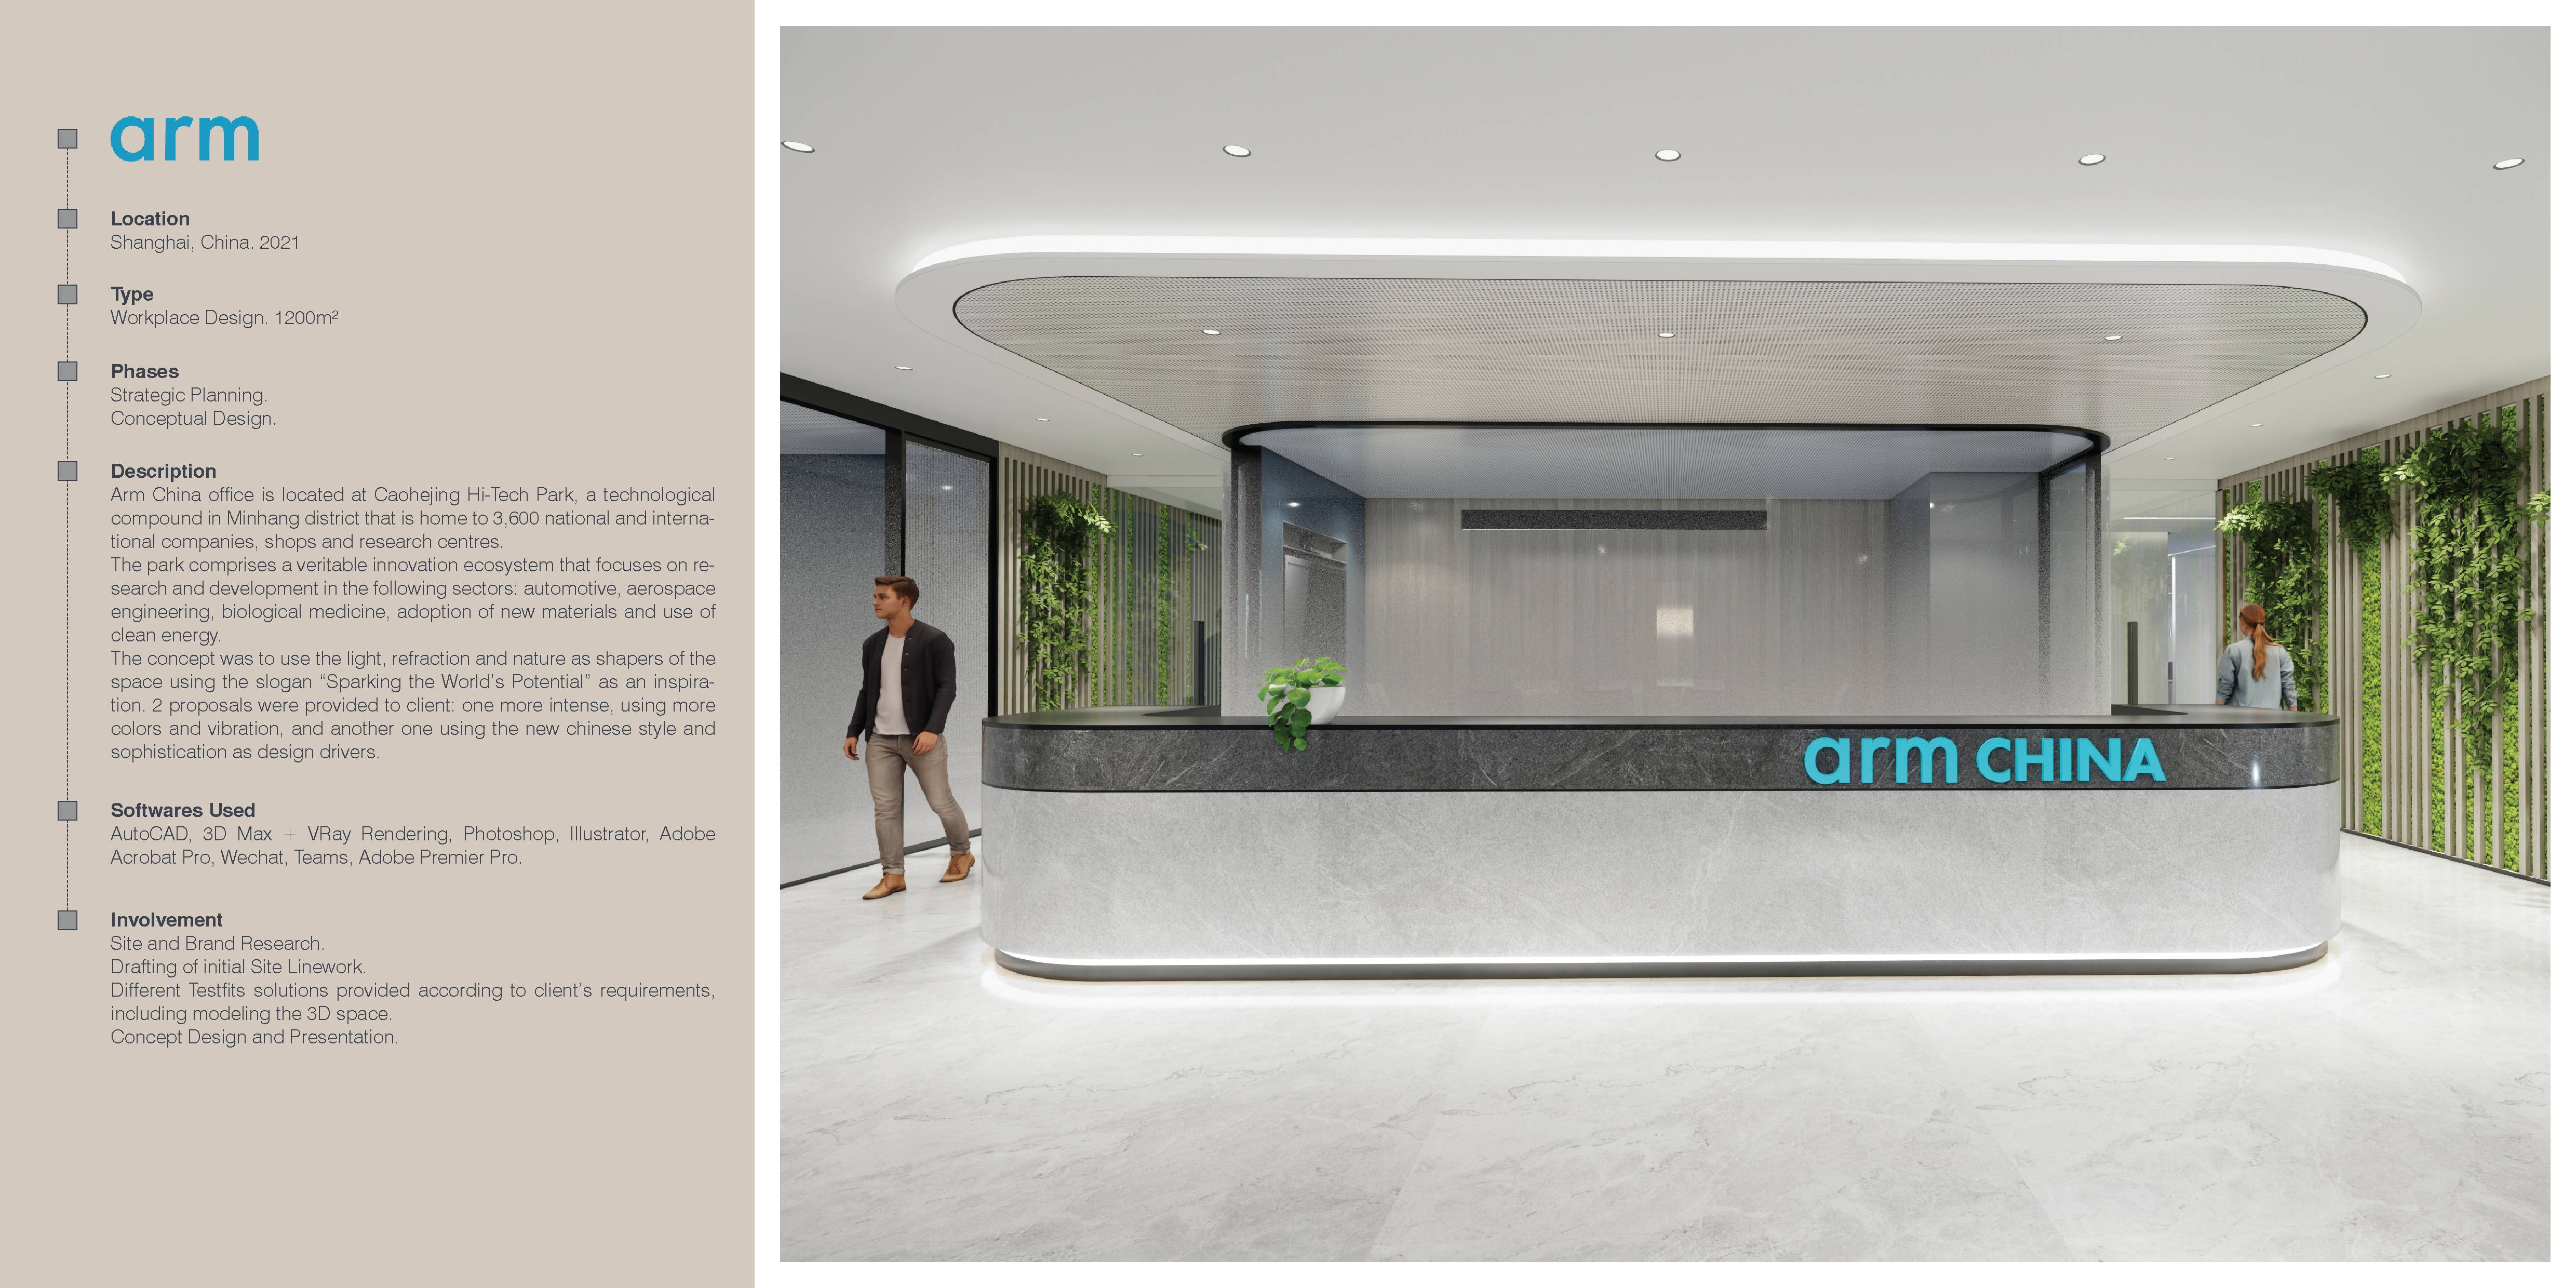 arm

Location
Shanghai. China. 2021

Type
Workplace Design. 1200m?

Phases
Strategic Planning
Conceptual Design

Description

Arm China office is located at Caohejing Hi-Tech Park. a technological
compound in Minhang district that is home to 3.600 national and interna-
tional companies. shops and research centres

The park comprises a veritable innovation ecosystem that focuses on re-
search and development in the following sectors: automotive. aerospace
engineering. biological medicine. adoption of new materials and use of
clean energy

The concept was to use the light. refraction and nature as shapers of the
space using the slogan “Sparking the World's Potential” as an inspira-
tion. 2 proposals were provided to client: one more intense. using more
colors and vibration. and another one using the new chinese style and
sophistication as design drivers

Softwares Used
AutoCAD. 3D Max - VRay Rendering. Photoshop. Illustrator. Adobe
Acrobat Pro. Wechat. Teams. Adobe Premier Pro

Involvement

Site and Brand Research

Drafting of initial Site Linework

Different Testfits solutions provided according to client's requirements.
including modeling the 3D space

Concept Design and Presentation